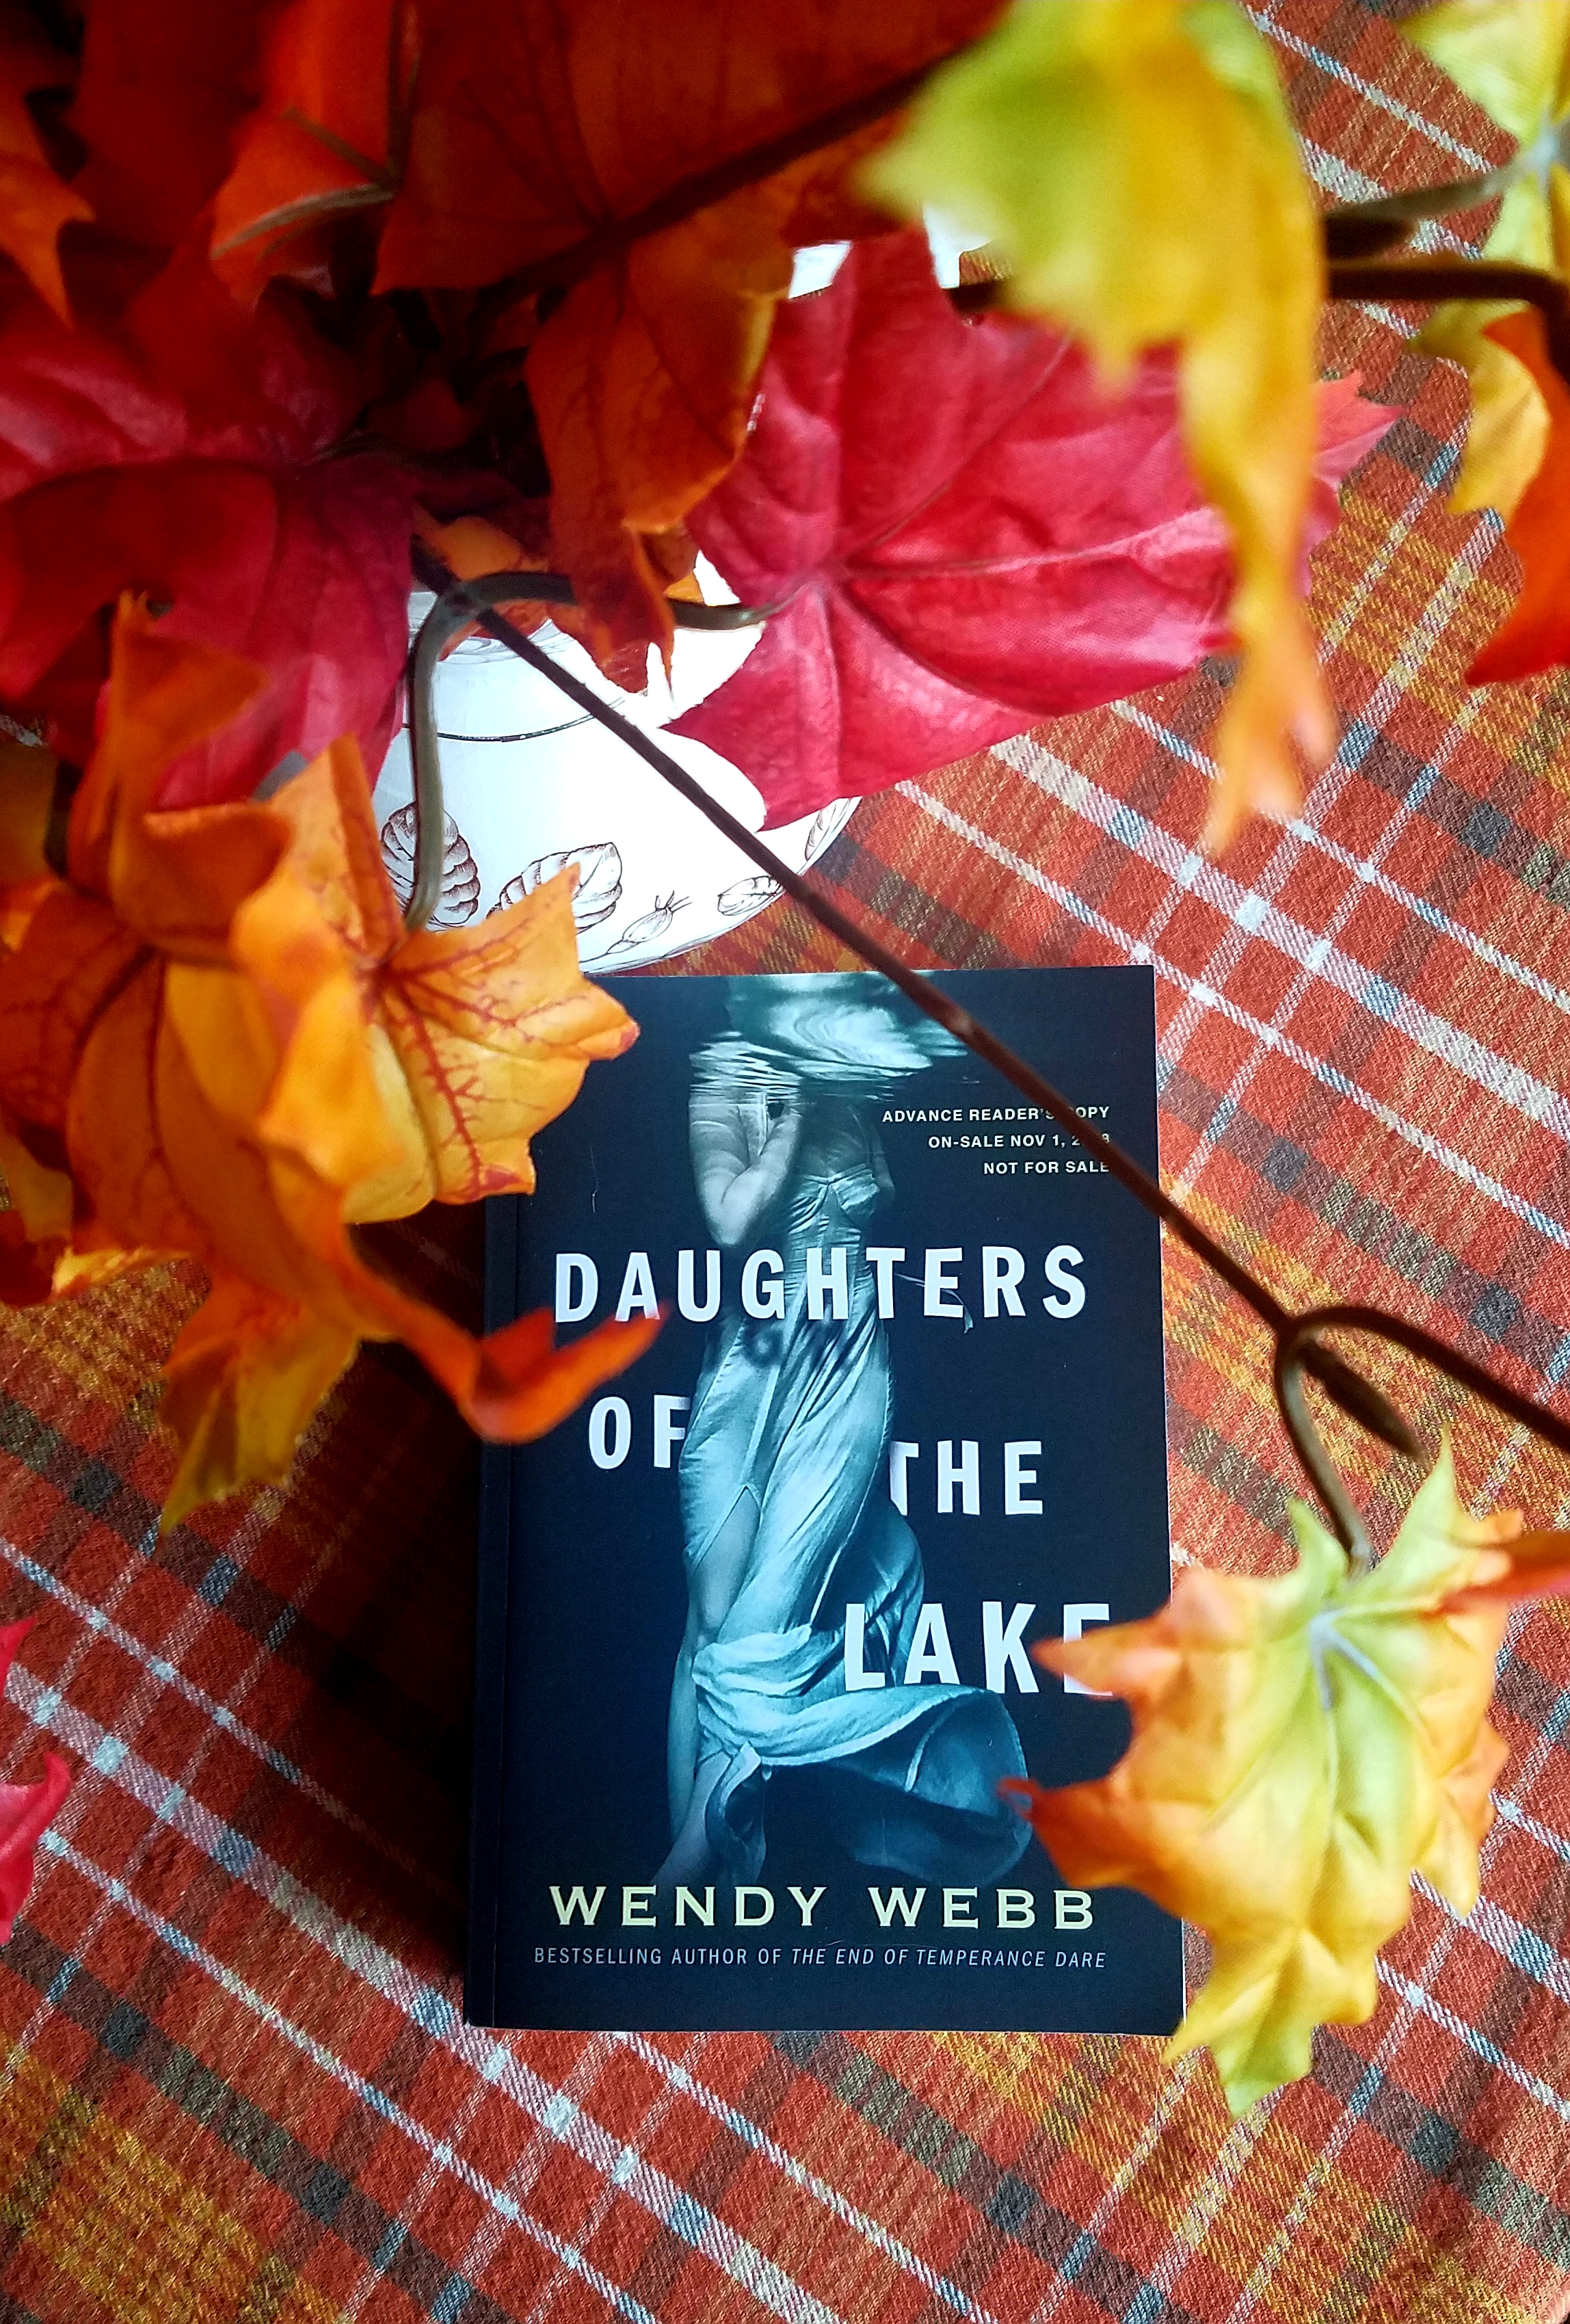 Book Review of DAUGHTERS OF THE LAKE